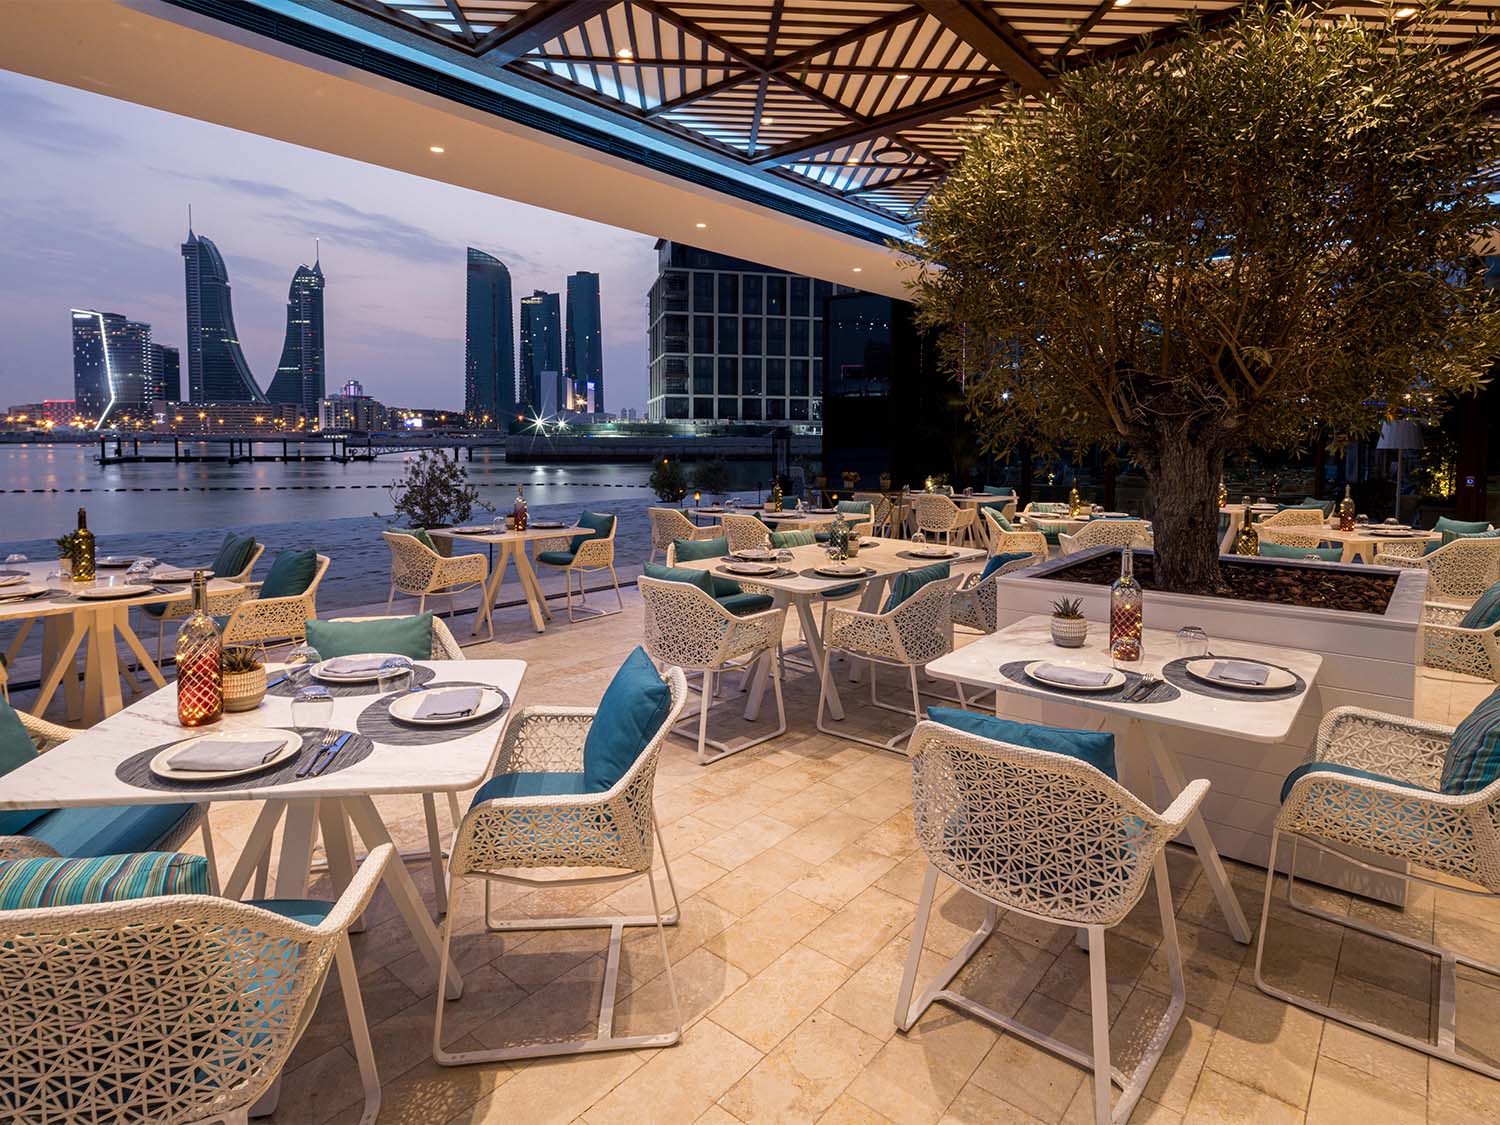 Byblos for an evening of refined Lebanese dining